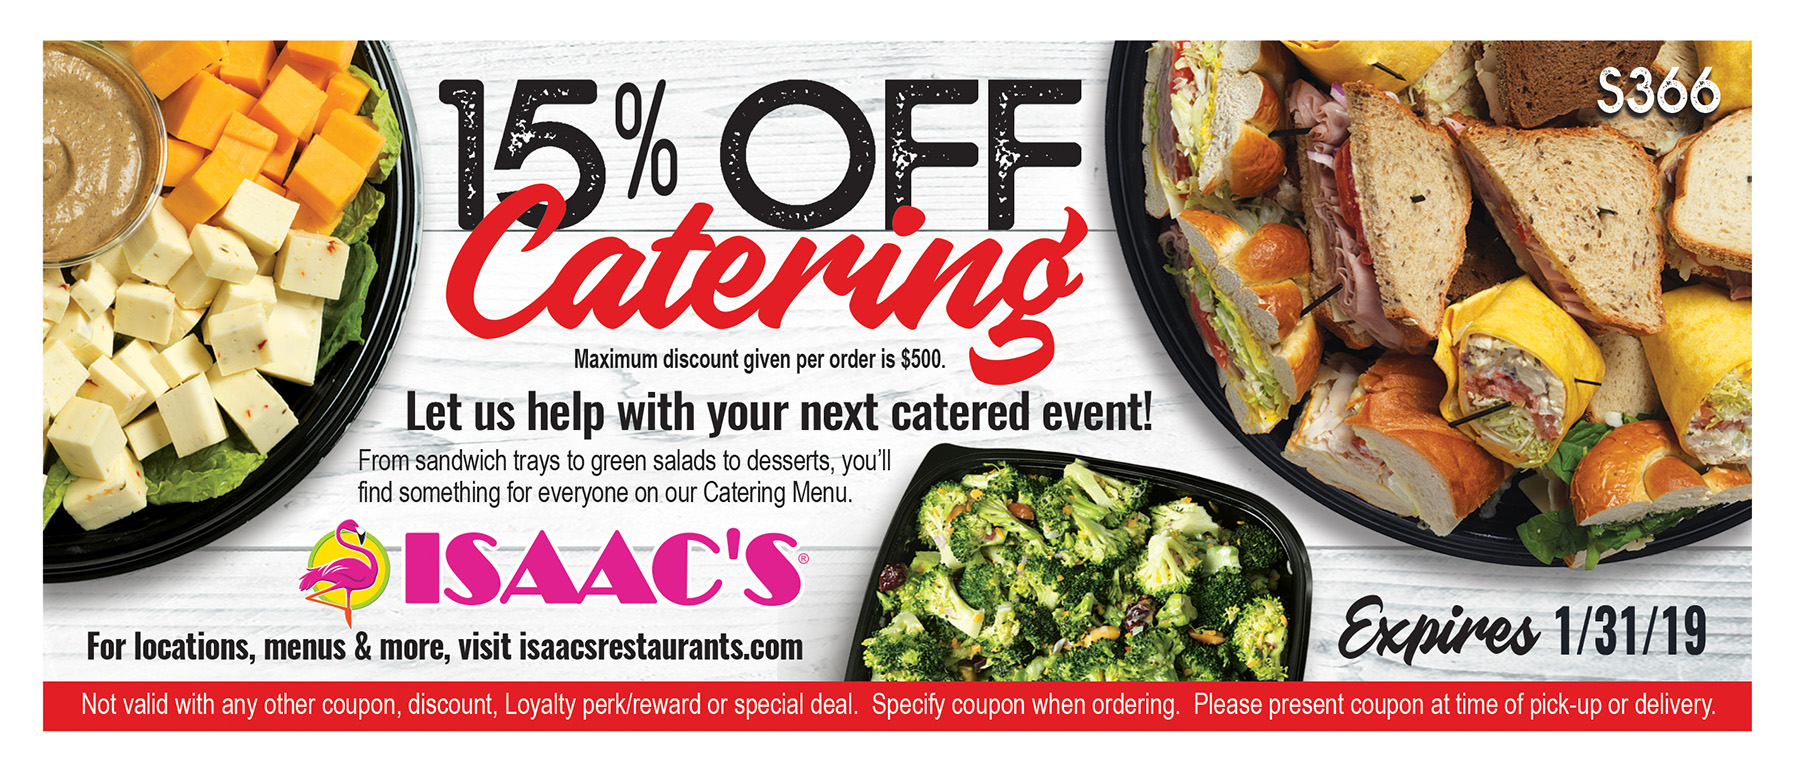 Catering Coupon Deals